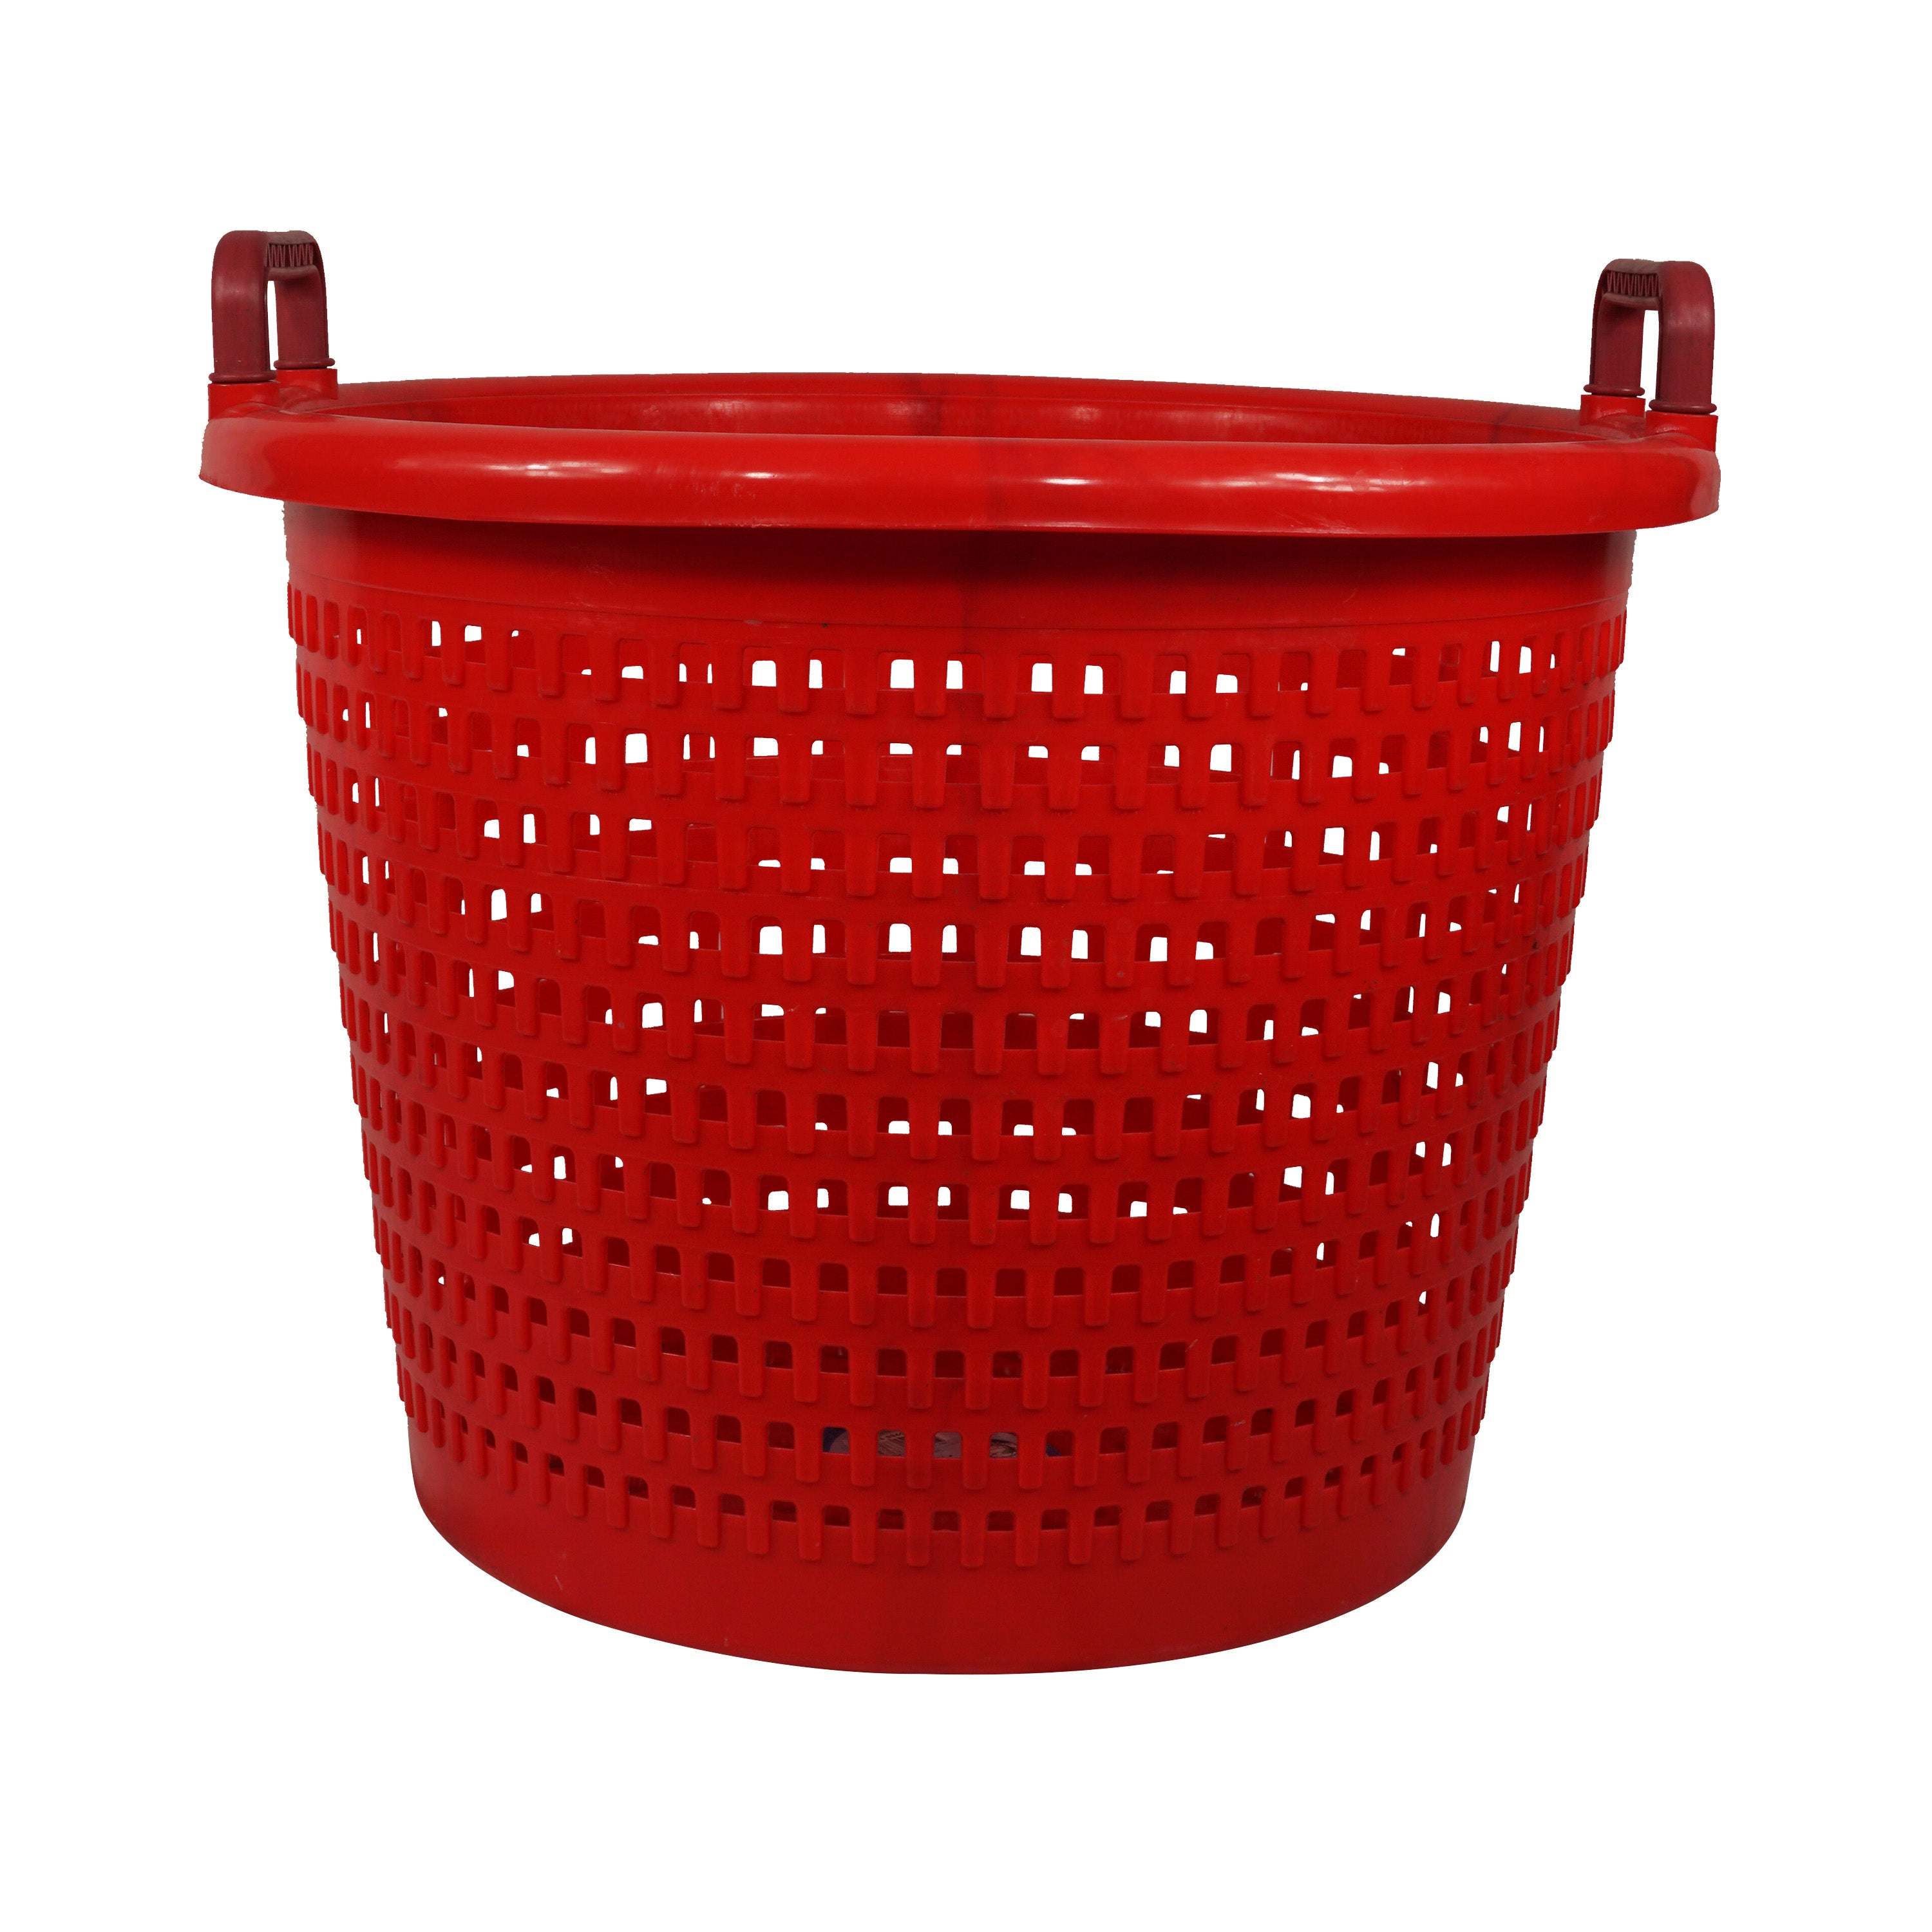 Baskets – Lee Fisher Sports